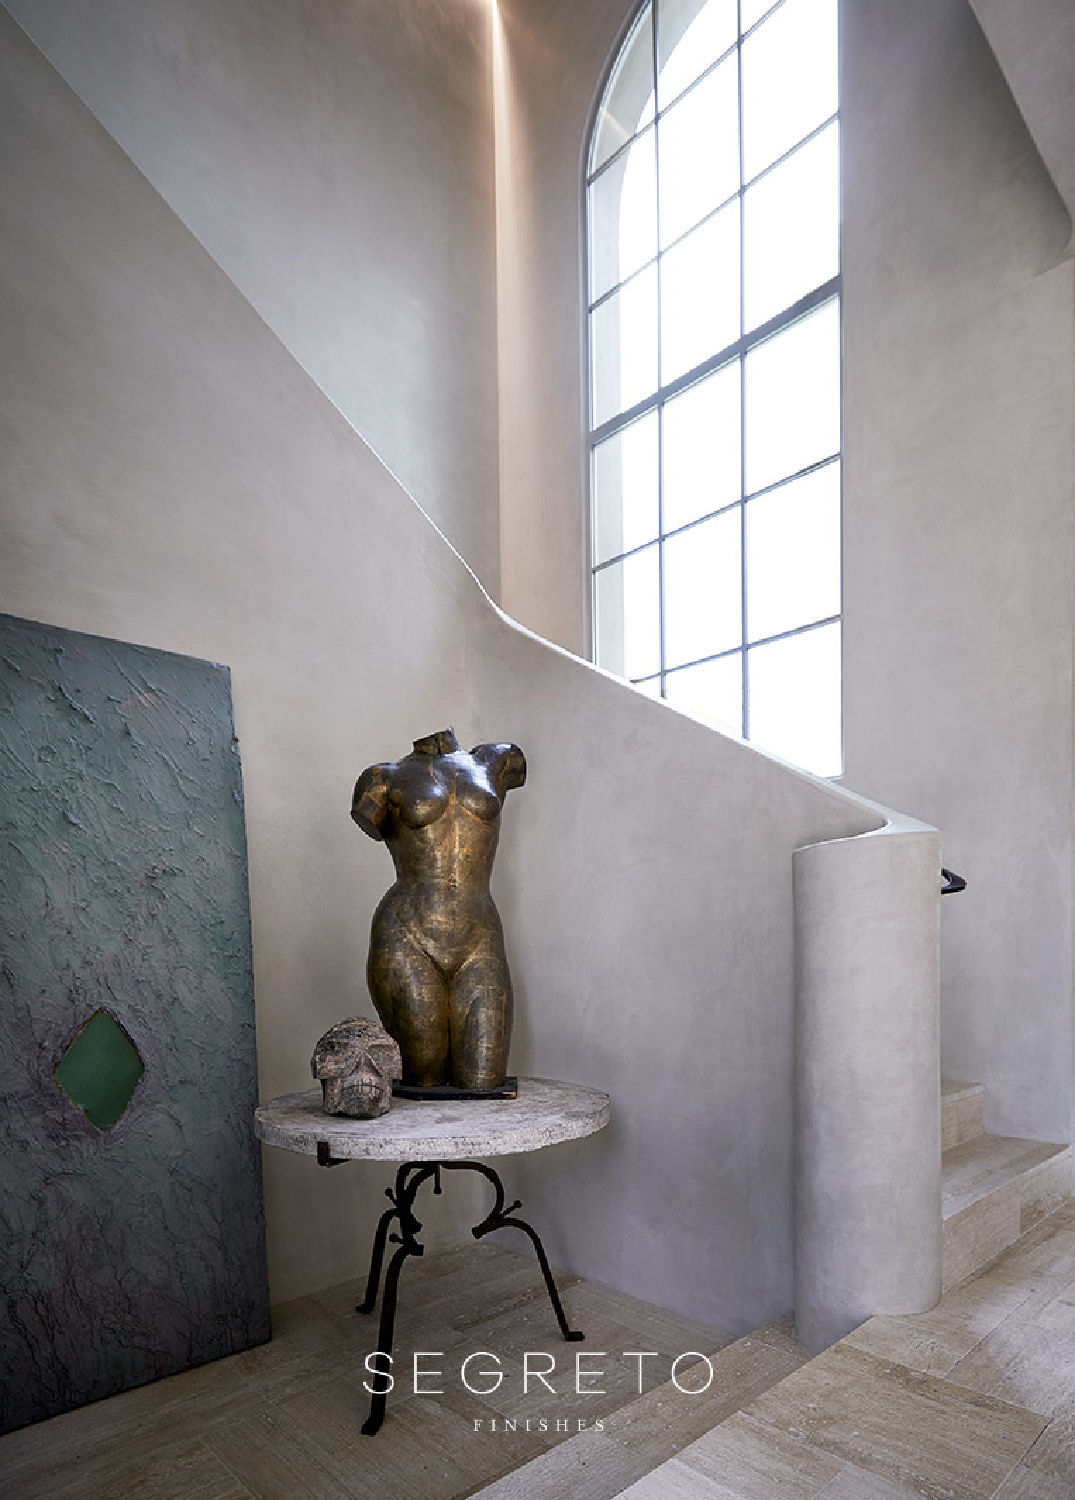 Sculptural staircase with beautiful plaster work by Segreto Finishes.